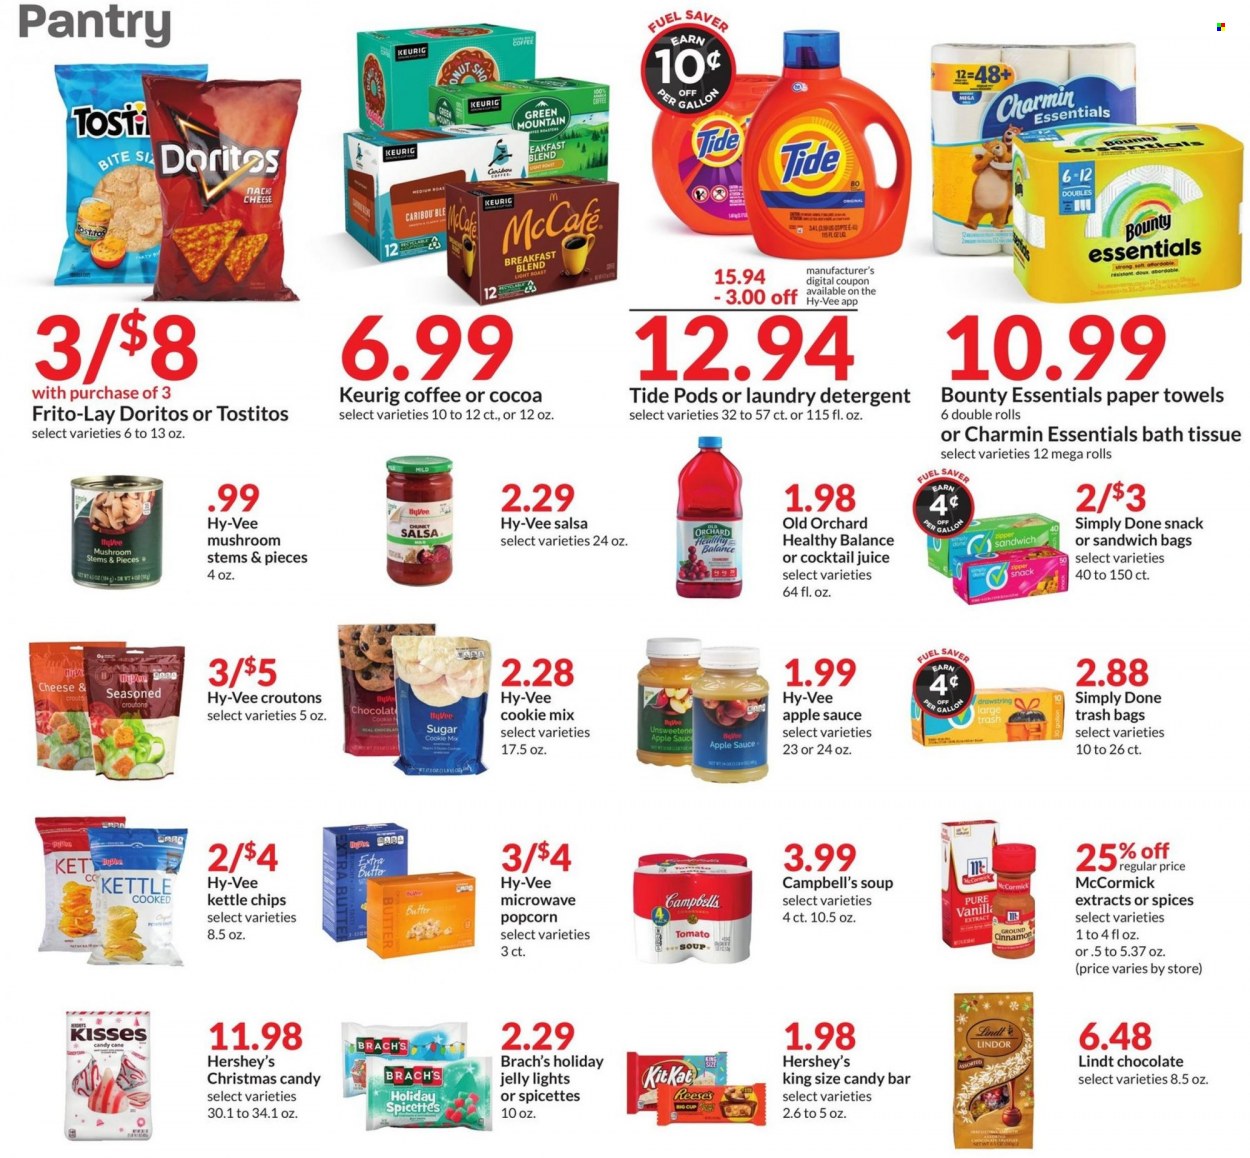 thumbnail - Hy-Vee Flyer - 11/30/2022 - 12/06/2022 - Sales products - mushrooms, Campbell's, tomato soup, soup, sauce, butter, Reese's, Hershey's, chocolate, snack, candy cane, Lindt, Lindor, Bounty, KitKat, jelly, Doritos, chips, kettle, popcorn, Frito-Lay, Tostitos, croutons, sugar, vanilla extract, cinnamon, salsa, apple sauce, juice, coffee, McCafe, Keurig, breakfast blend, Green Mountain, bath tissue, kitchen towels, paper towels, Charmin, detergent, Tide, laundry detergent, trash bags, cup. Page 5.